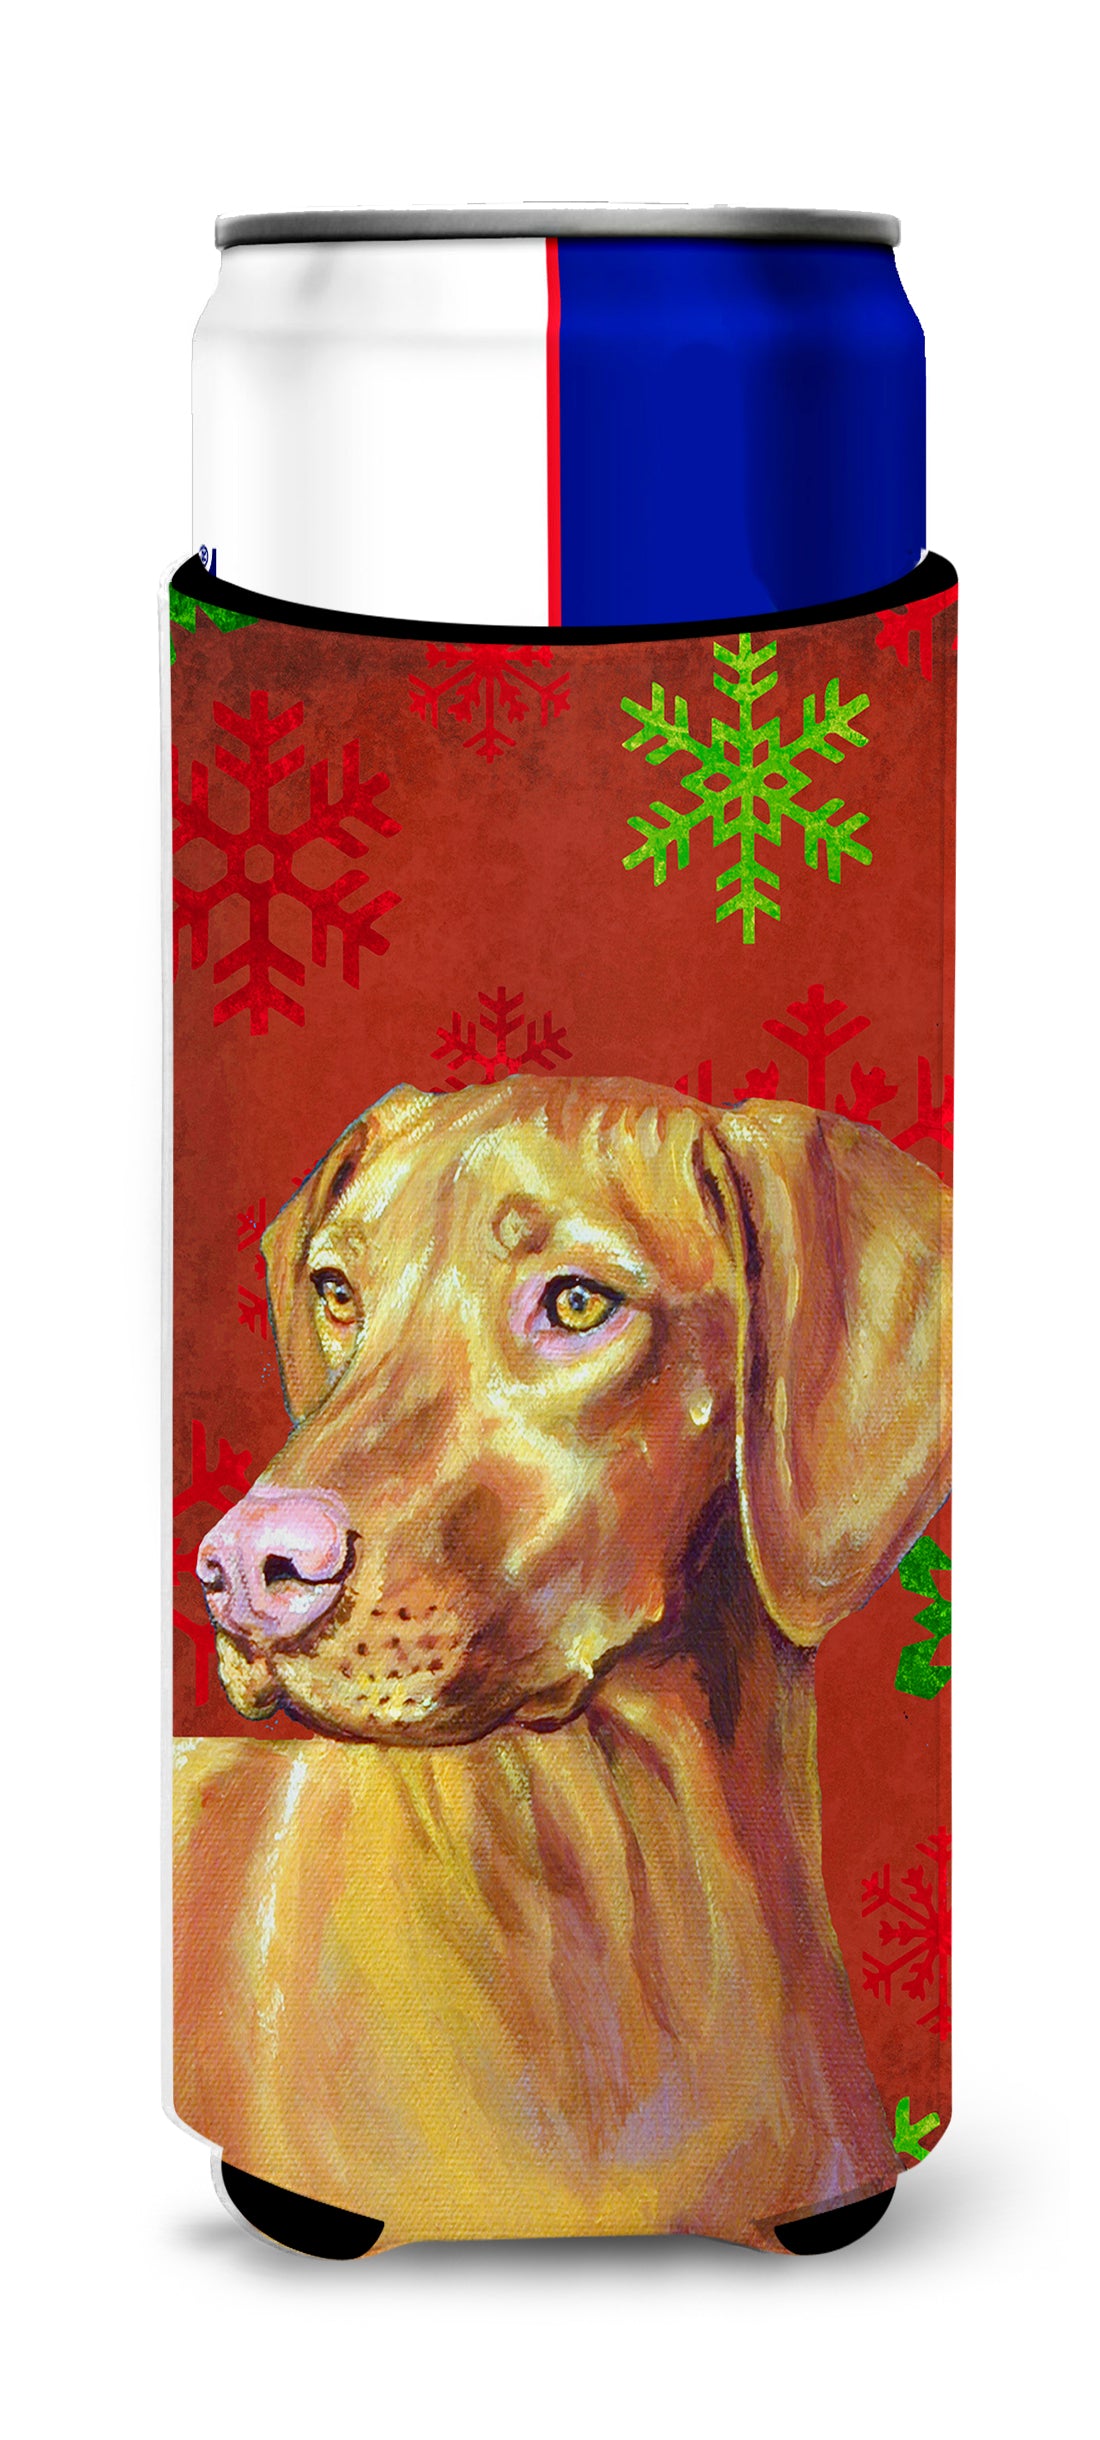 Vizsla Red and Green Snowflakes Holiday Christmas Ultra Beverage Insulators for slim cans LH9325MUK.